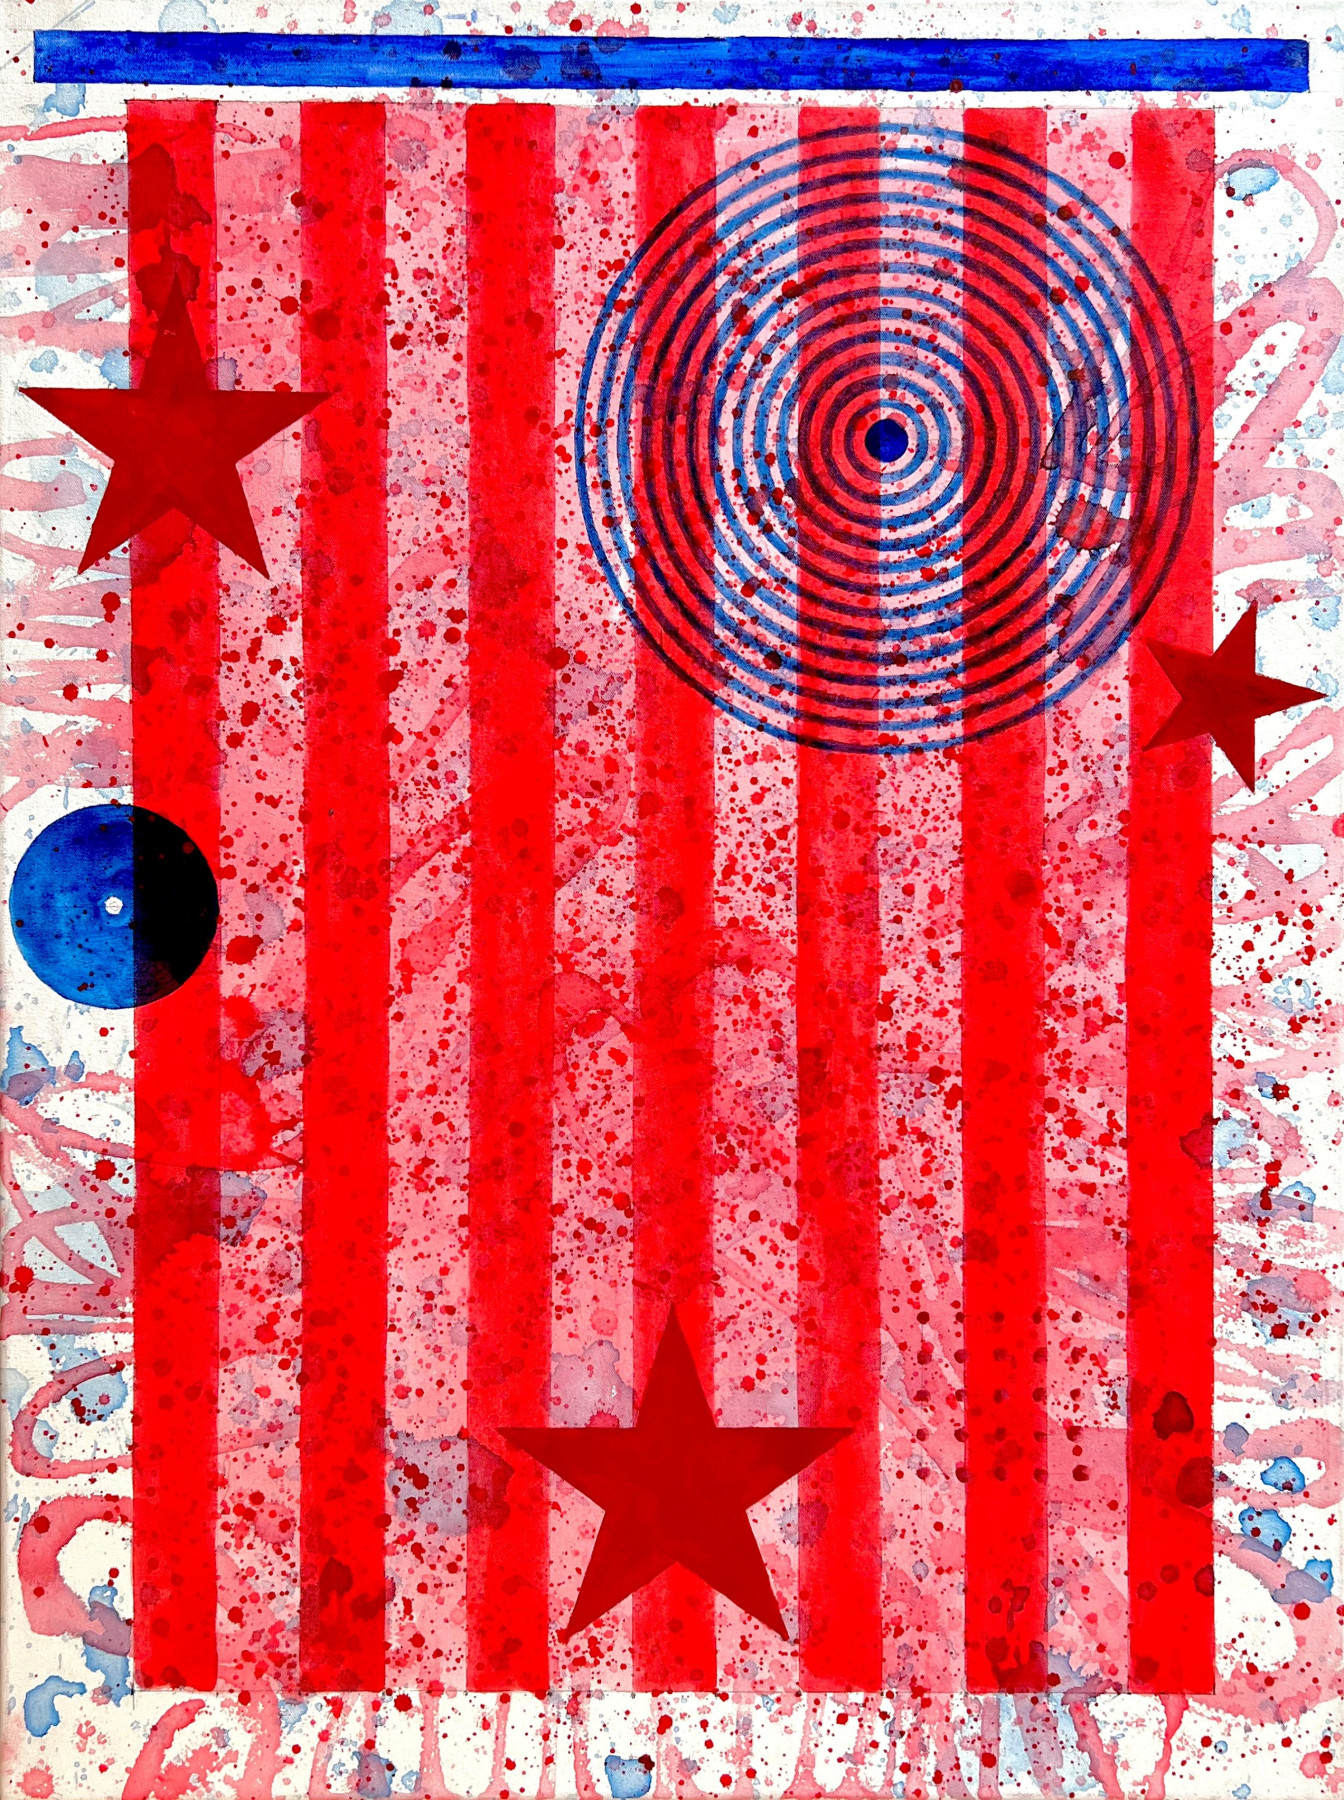 J. Steven Manolis (1948), The Steady State American Flag, 2023, Acrylic on canvas, 40 x 30 inches